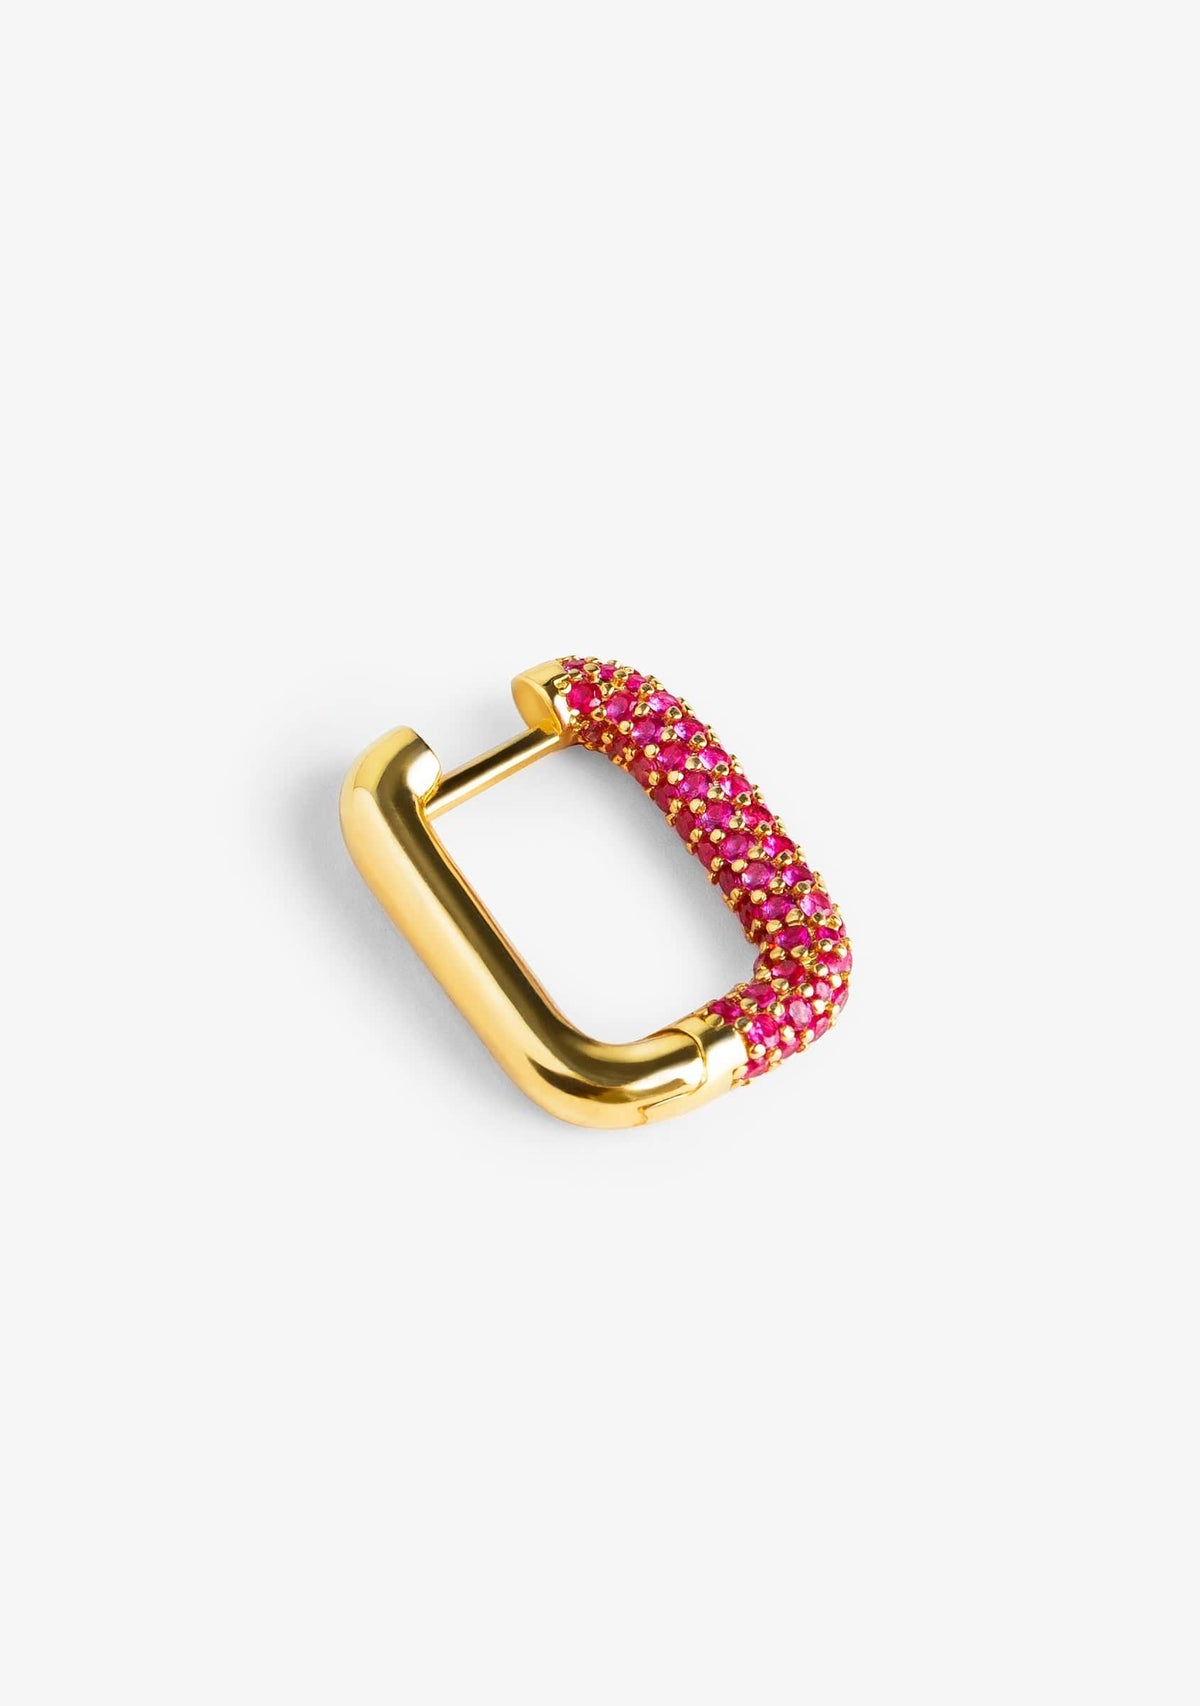 Couture Ruby Piercing Gold